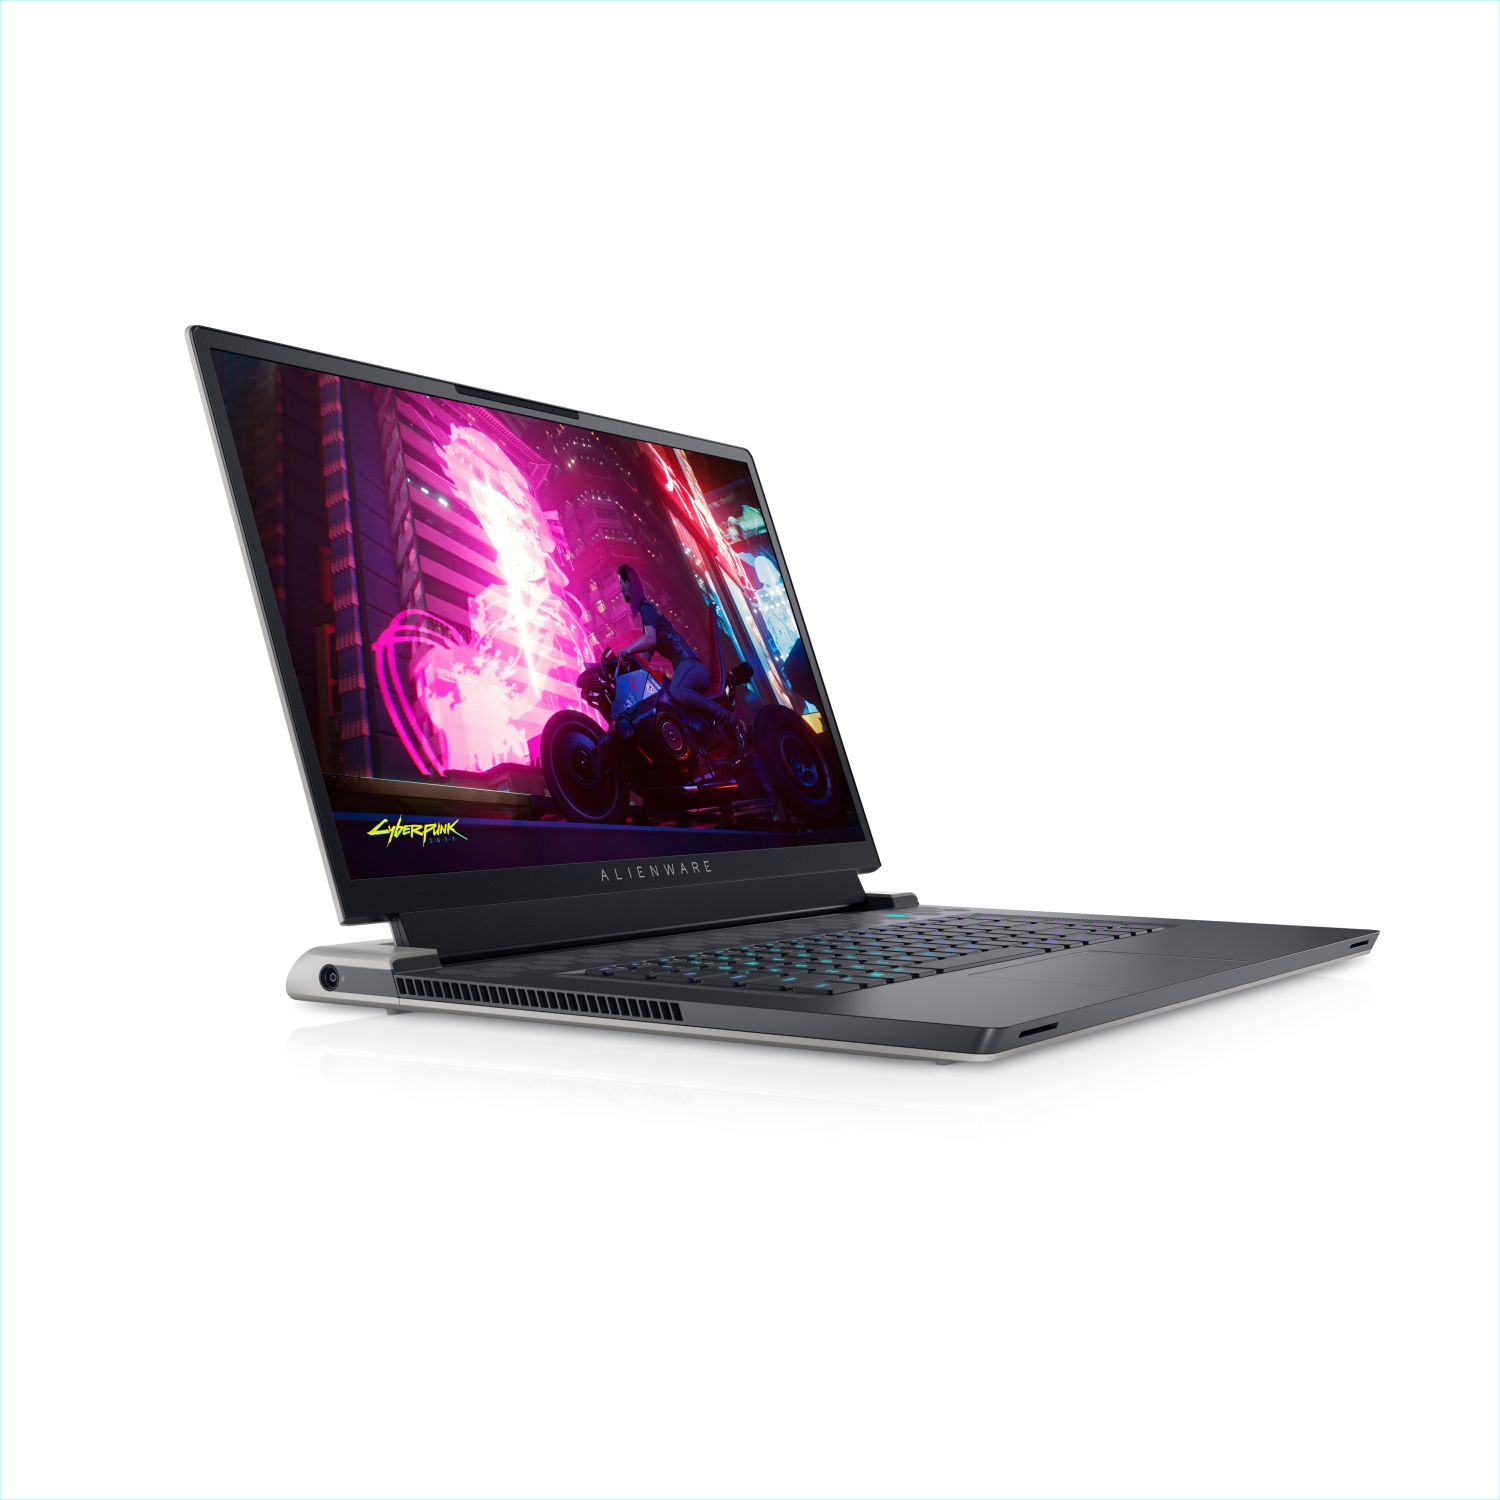 Refurbished (Excellent) - Dell Alienware X17 R1 Gaming Laptop (2021), 17.3" FHD, Core i7 - 256GB SSD + 256GB SSD - 64GB RAM - RTX 3070, 4.6 GHz - 11th Gen CPU Certified